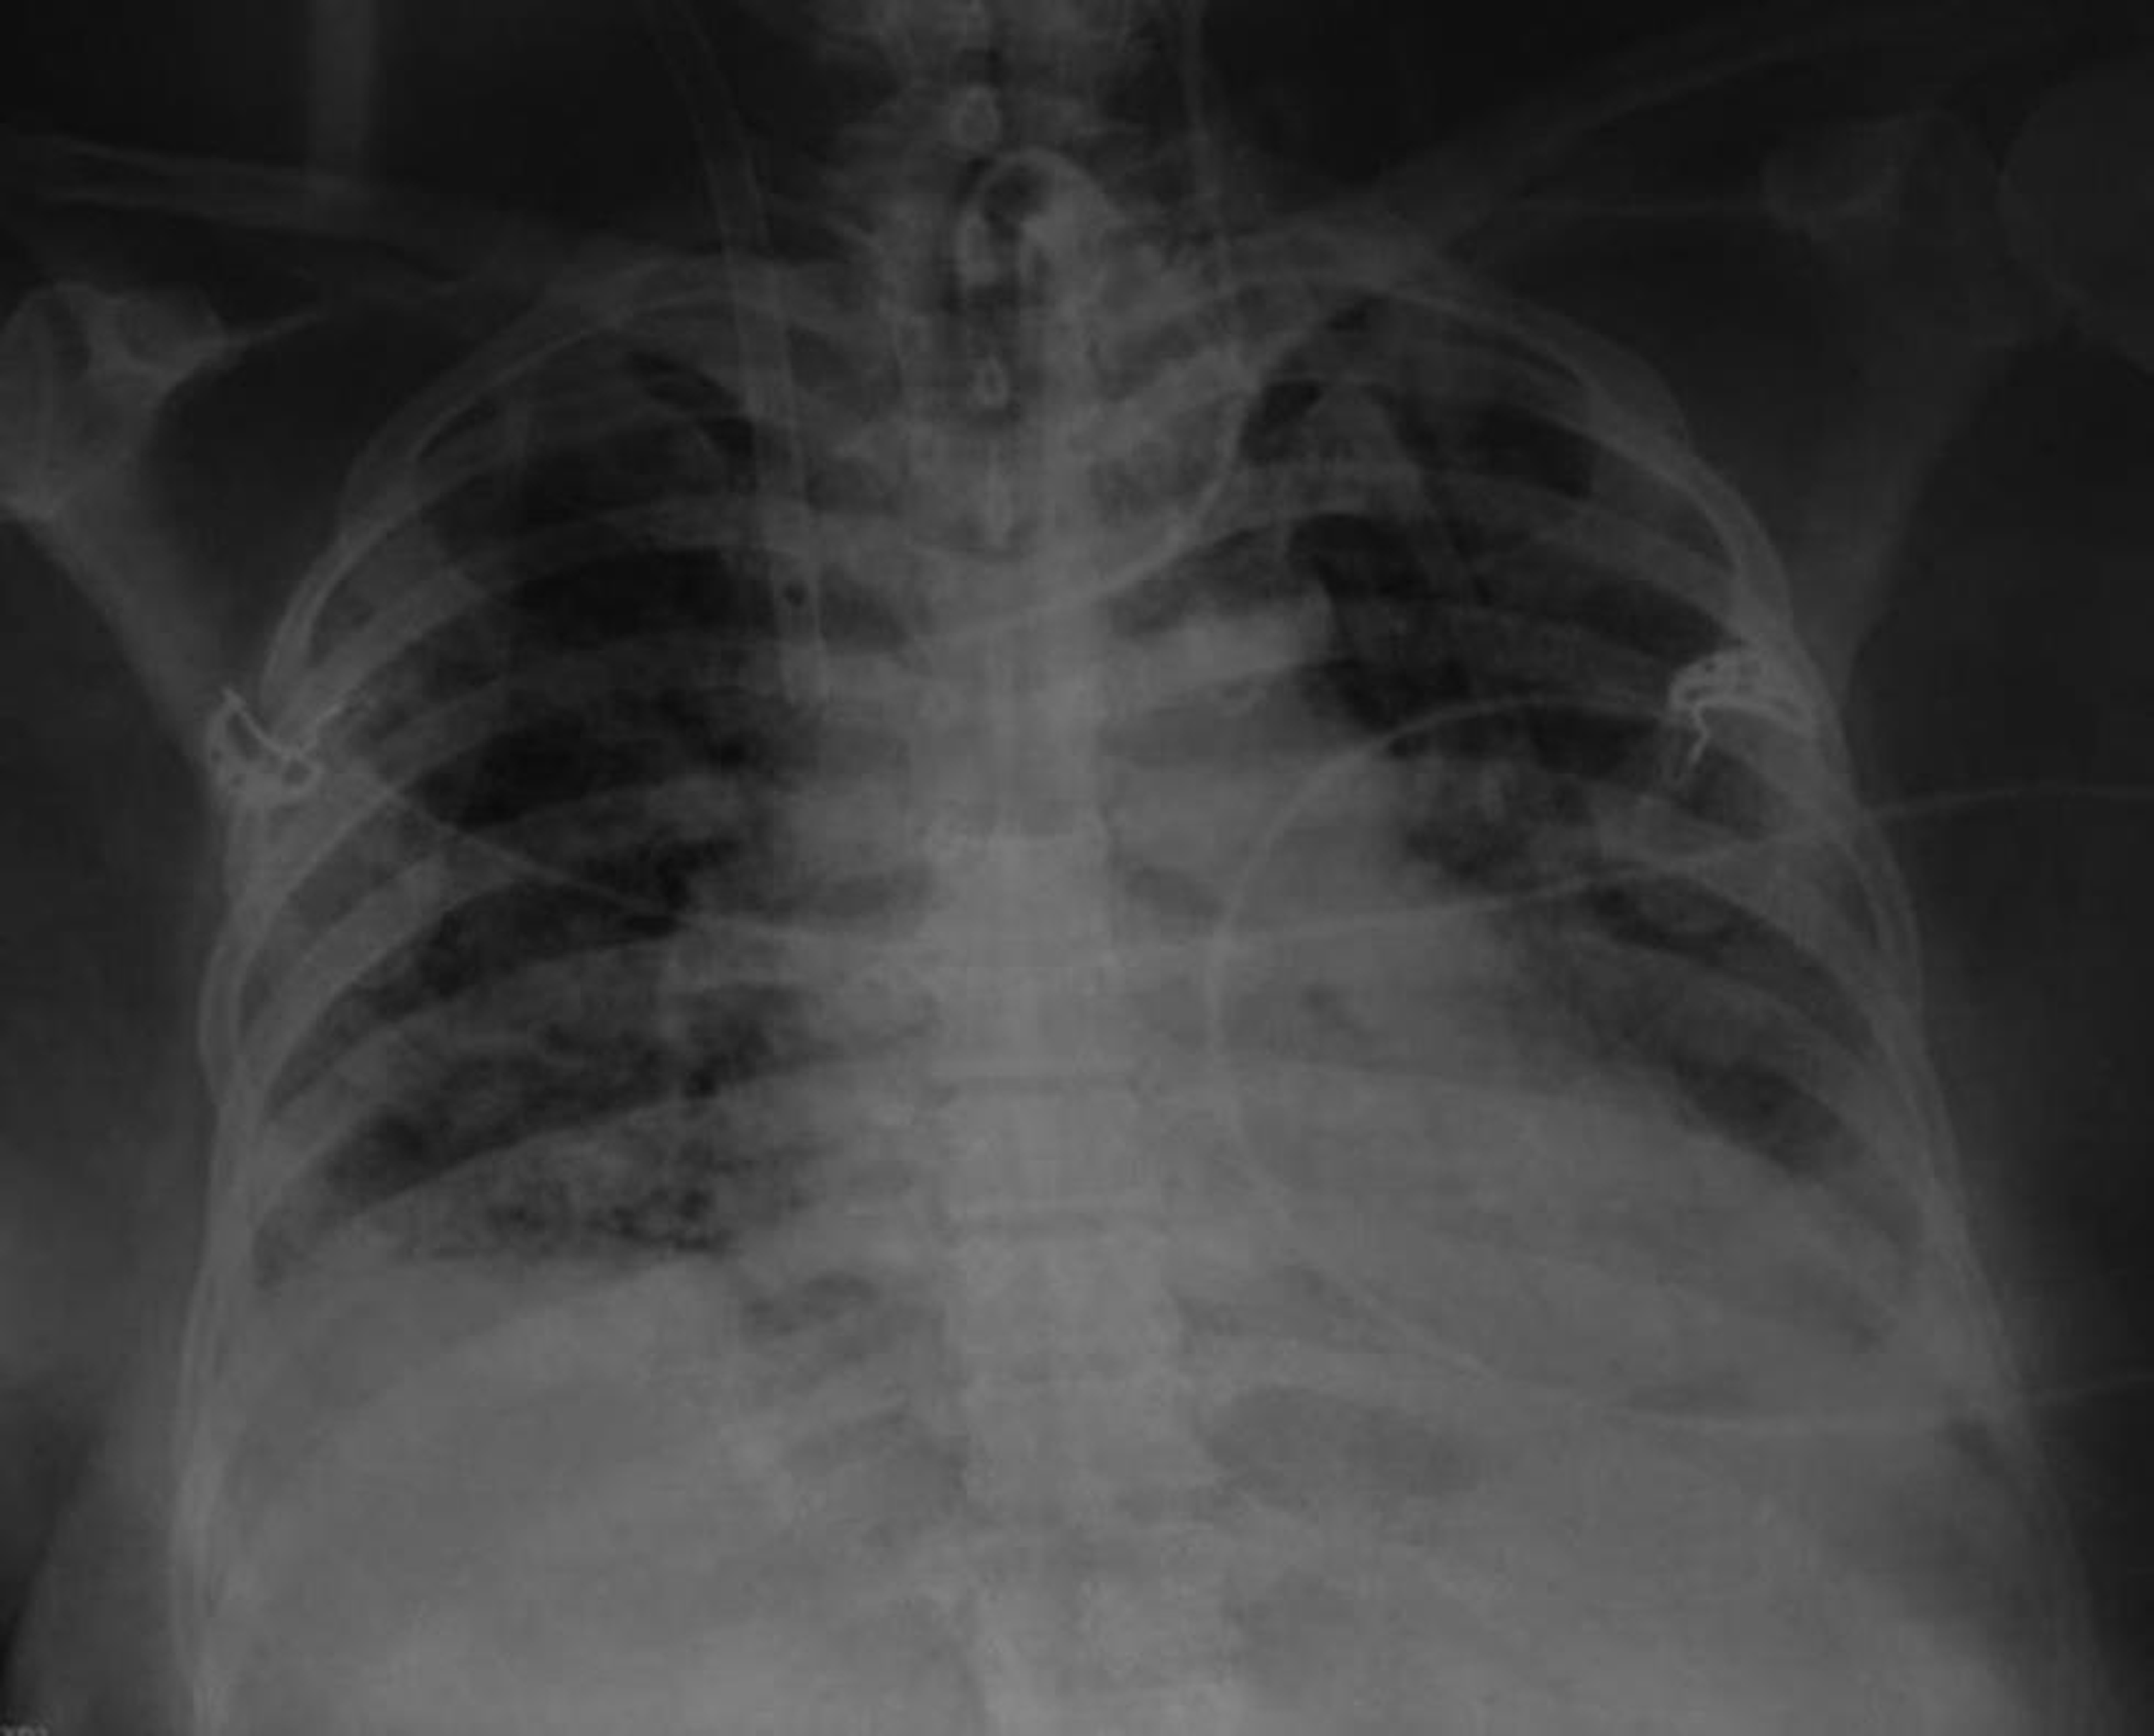 Chest X-ray on 86th Day of extracorporeal membrane oxygenation showing slow beginning of resolution of acute respiratory distress syndrome.